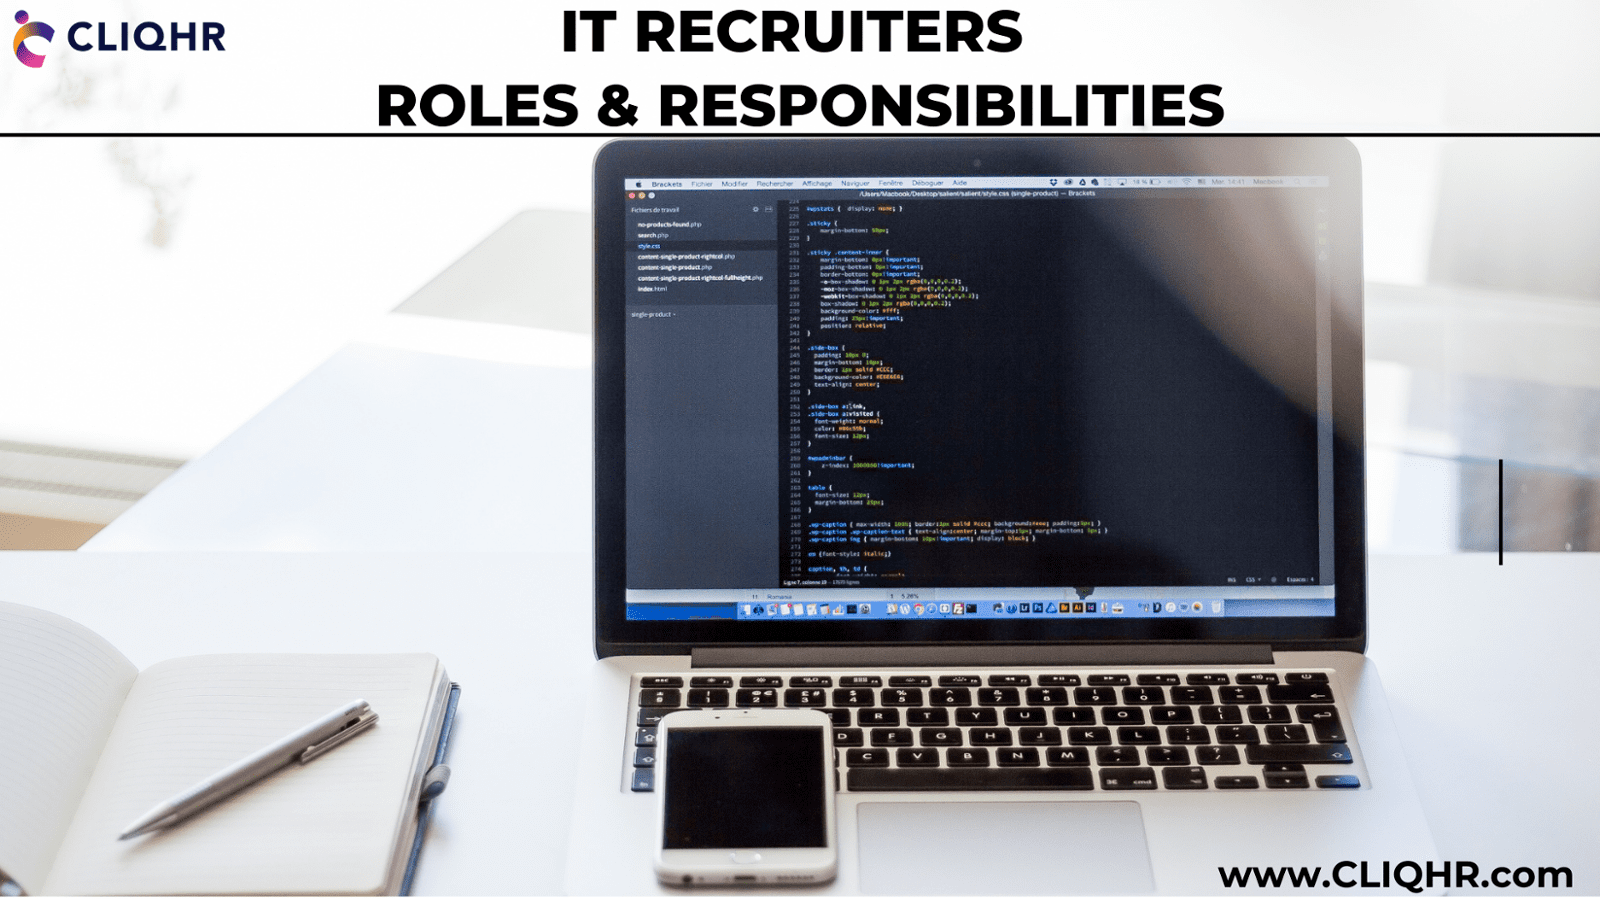 The Roles and Responsibilities of an IT Recruiter